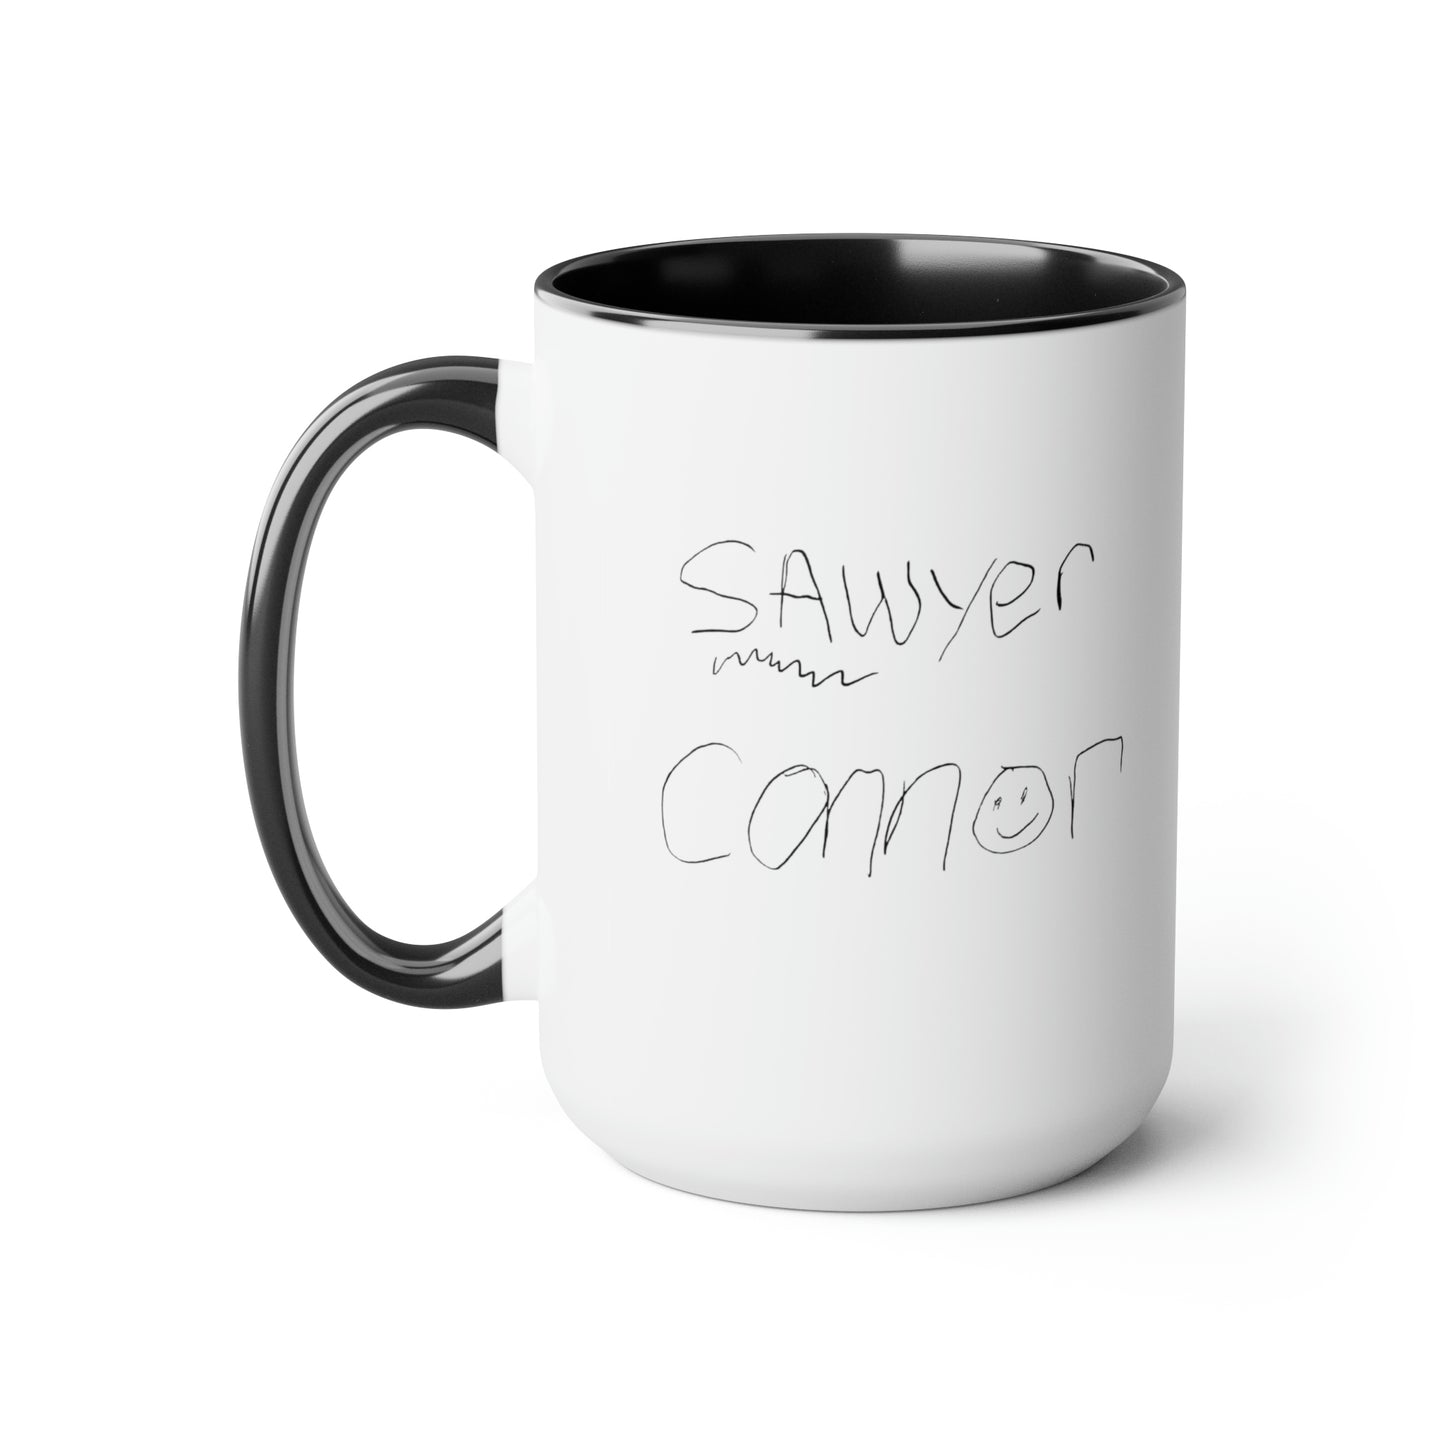 Special Design Connor and Sawyer Stick Figure Two-Tone Coffee Mugs, 15oz